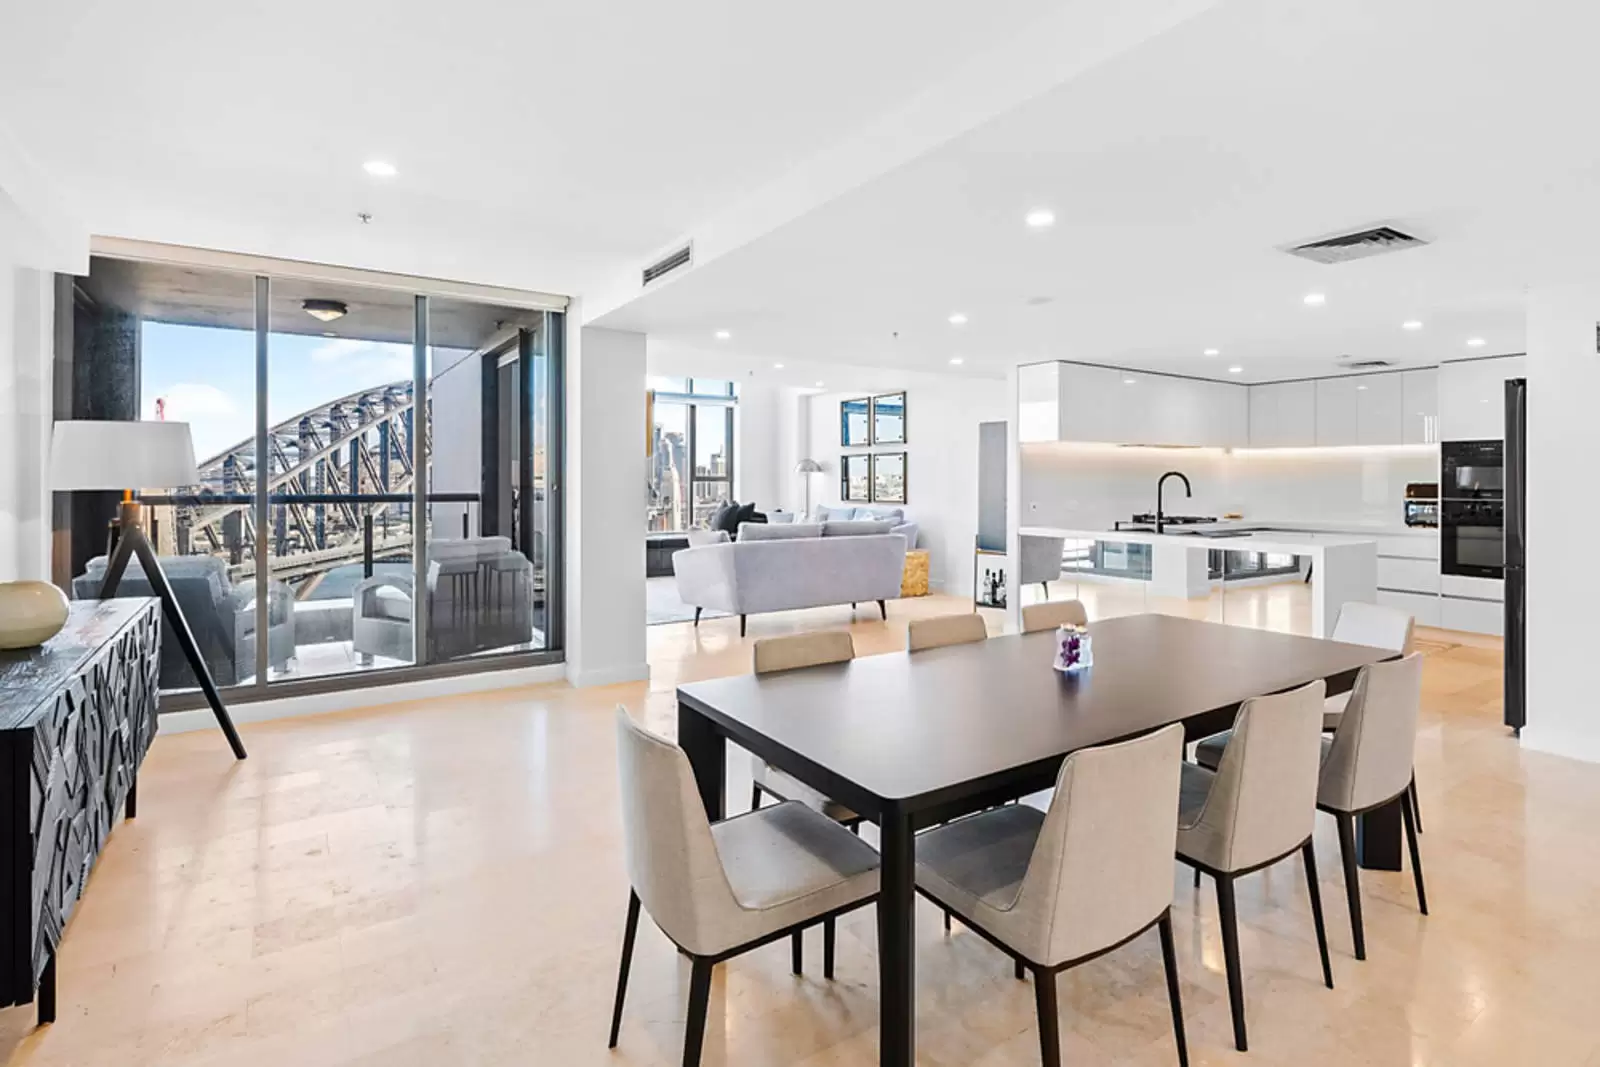 Photo #8: 1906/2 Dind Street, Milsons Point - Leased by Sydney Sotheby's International Realty